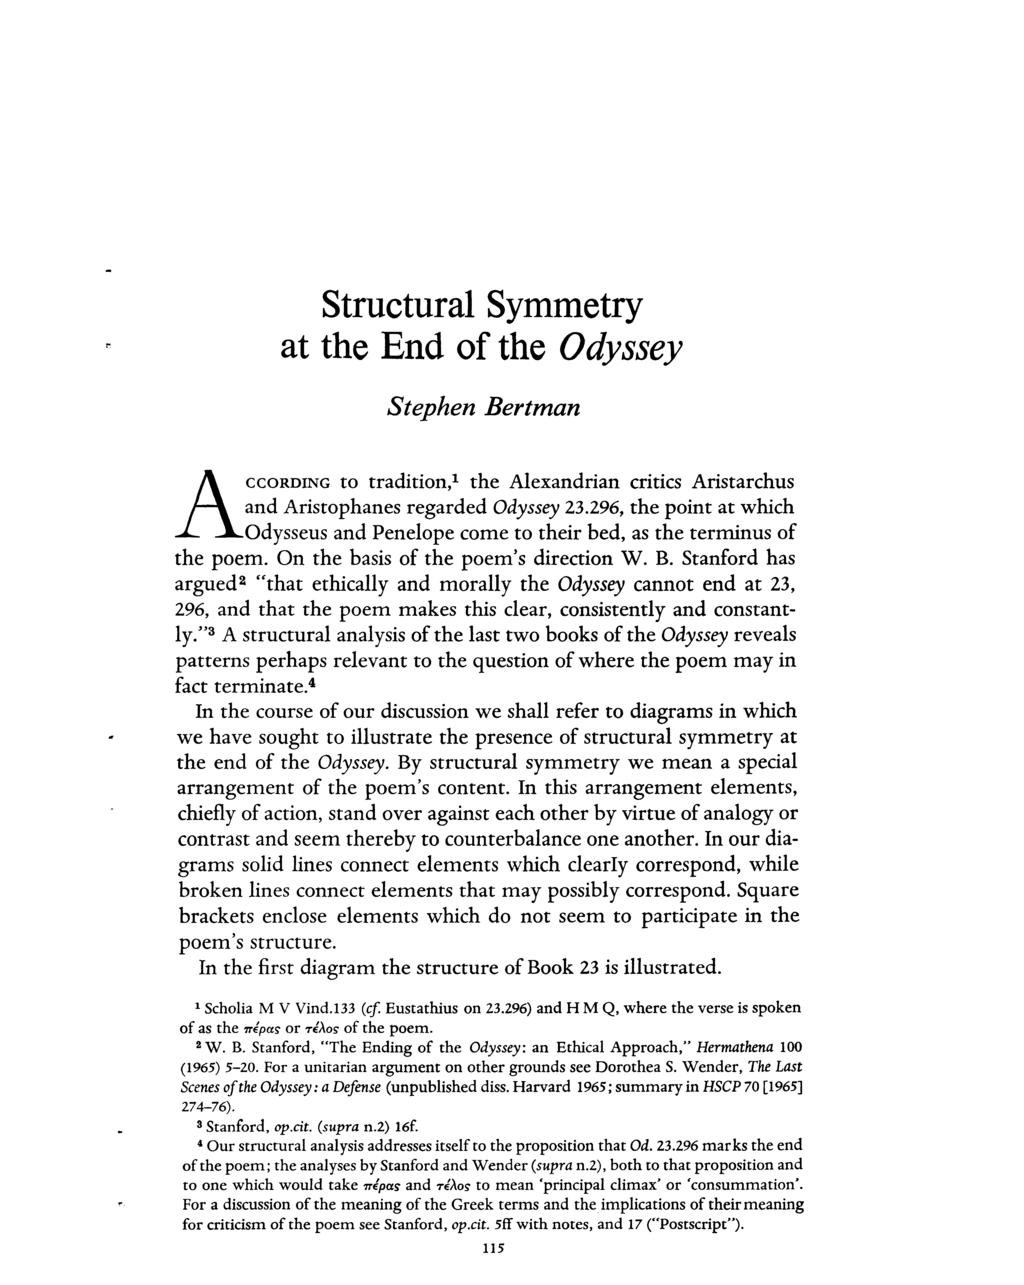 Structural Symmetry at the End of the Odyssey Stephen Bertman ACCORDING to tradition,l the Alexandrian critics Aristarchus and Aristophanes regarded Odyssey 23.